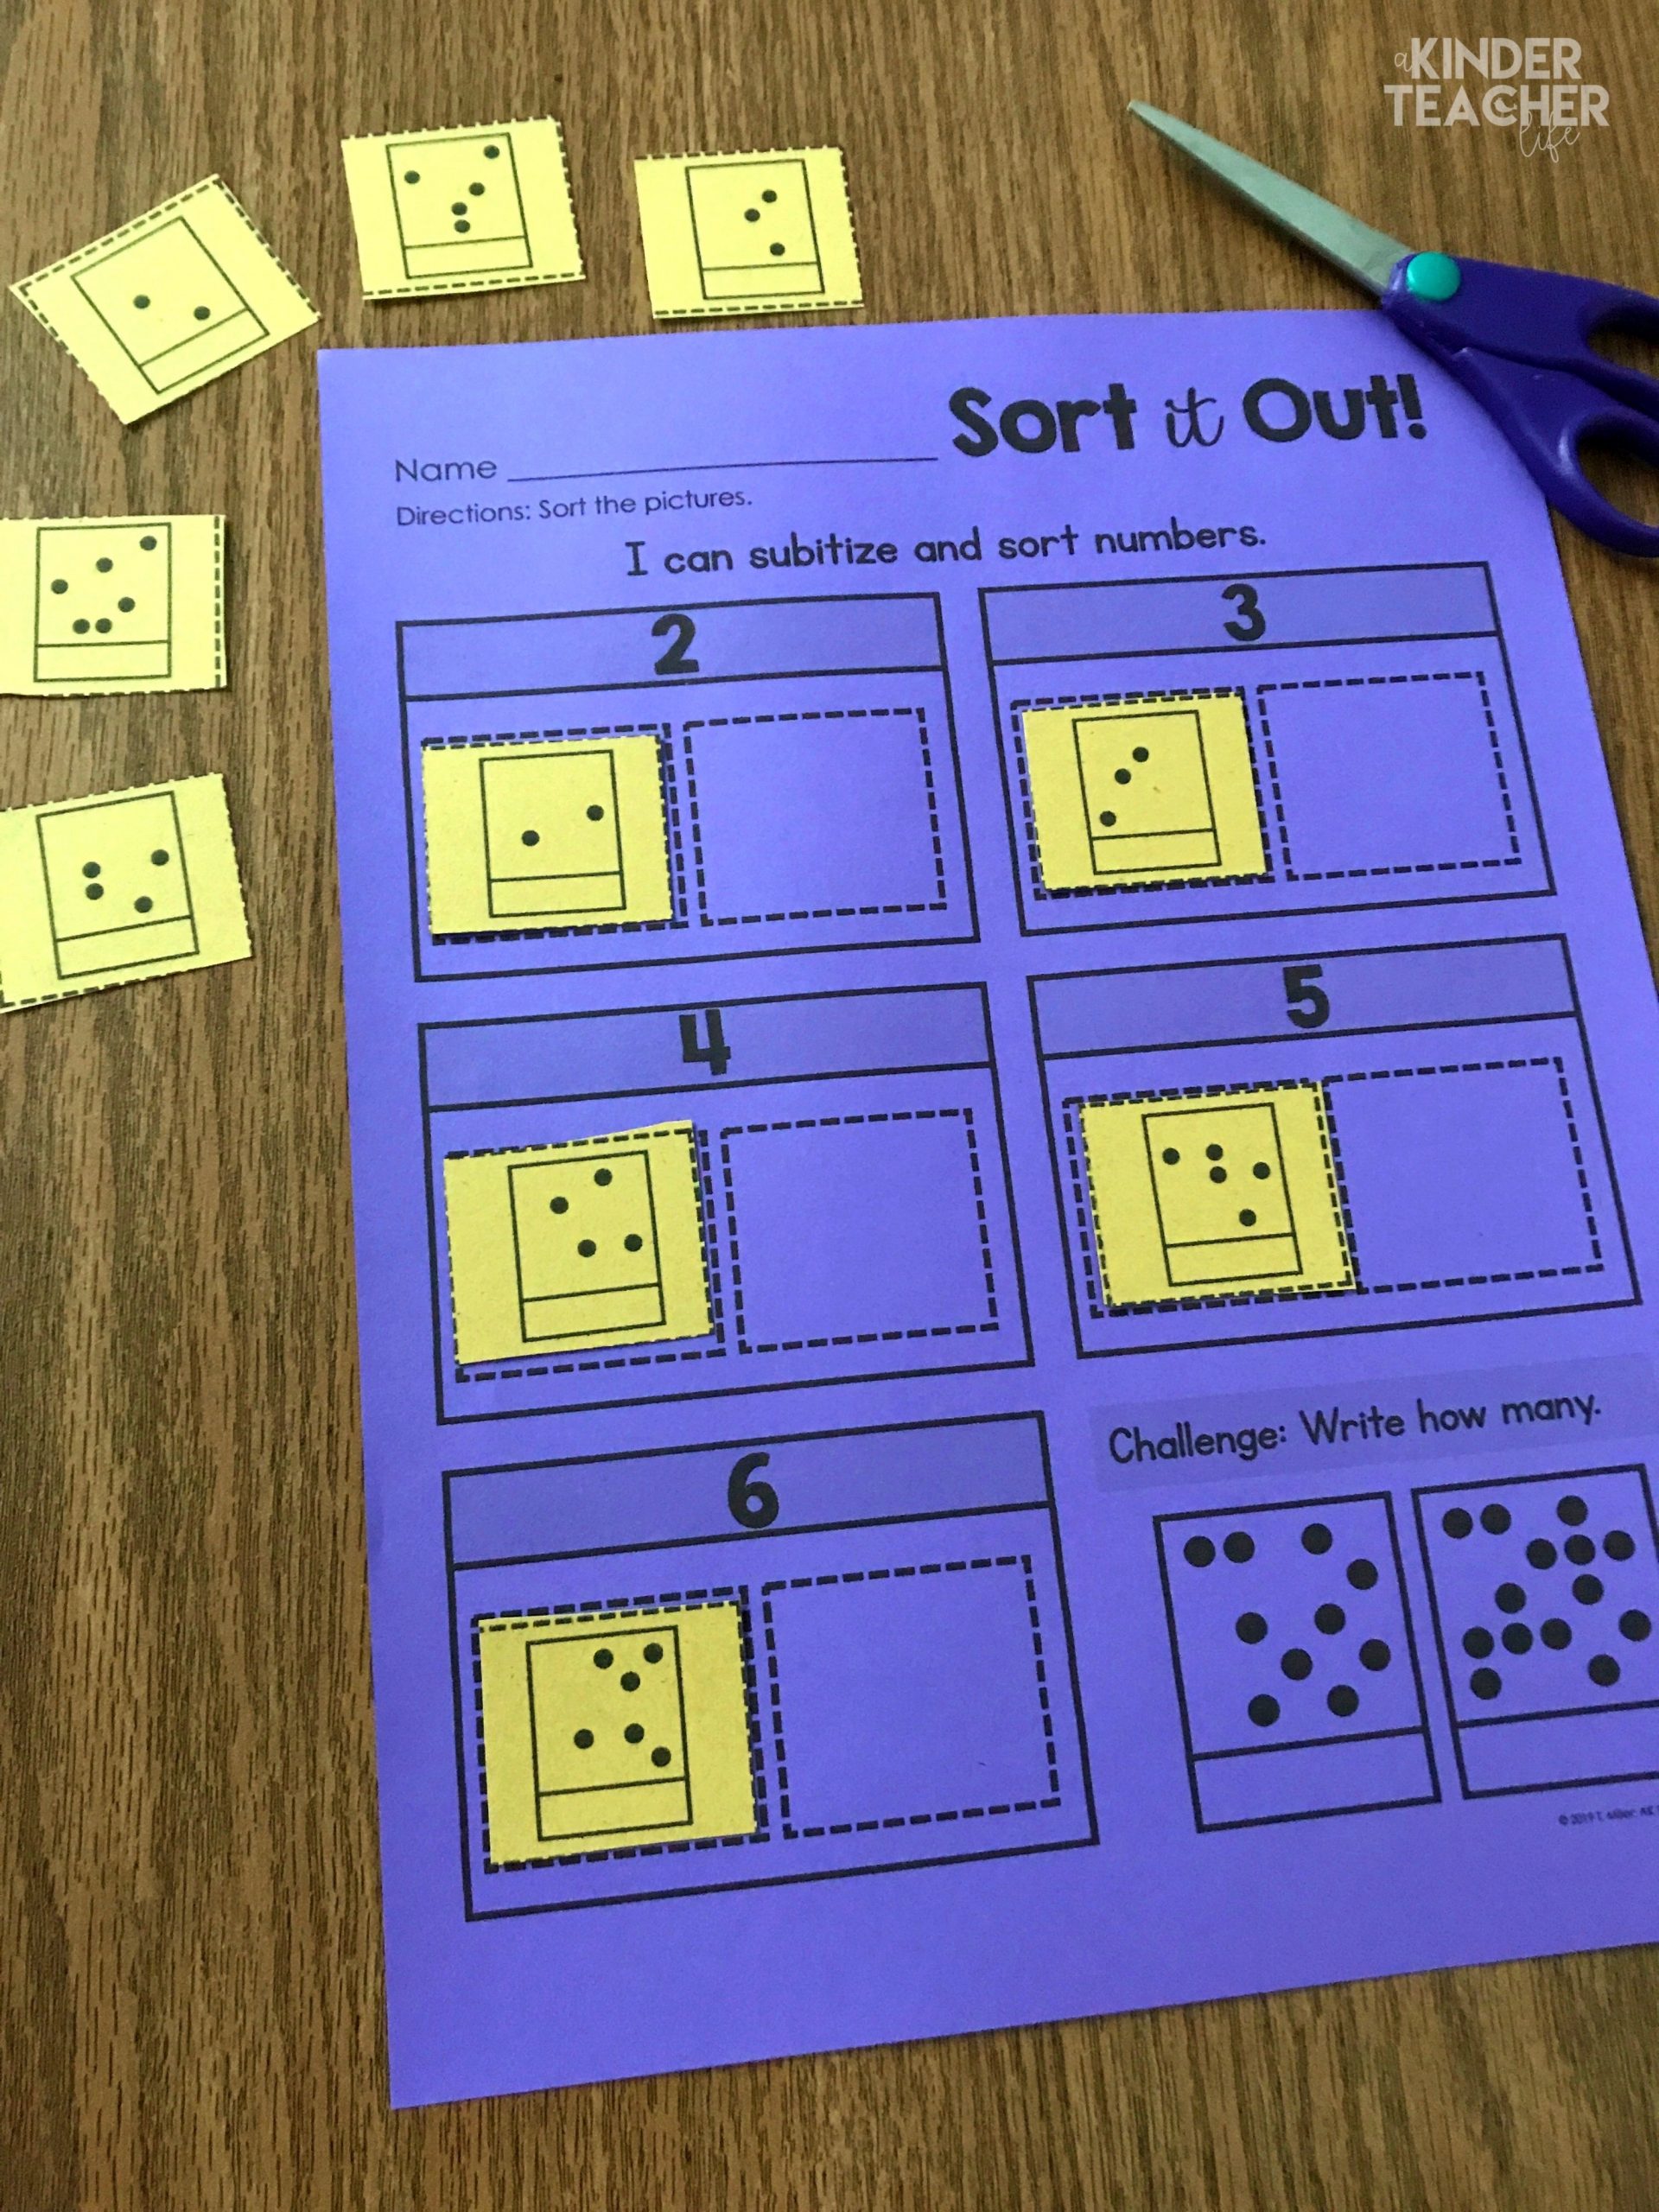 Subitizing sorting worksheet - Subitize dot patterns up to ten. This is perfect for small group or independent work. 